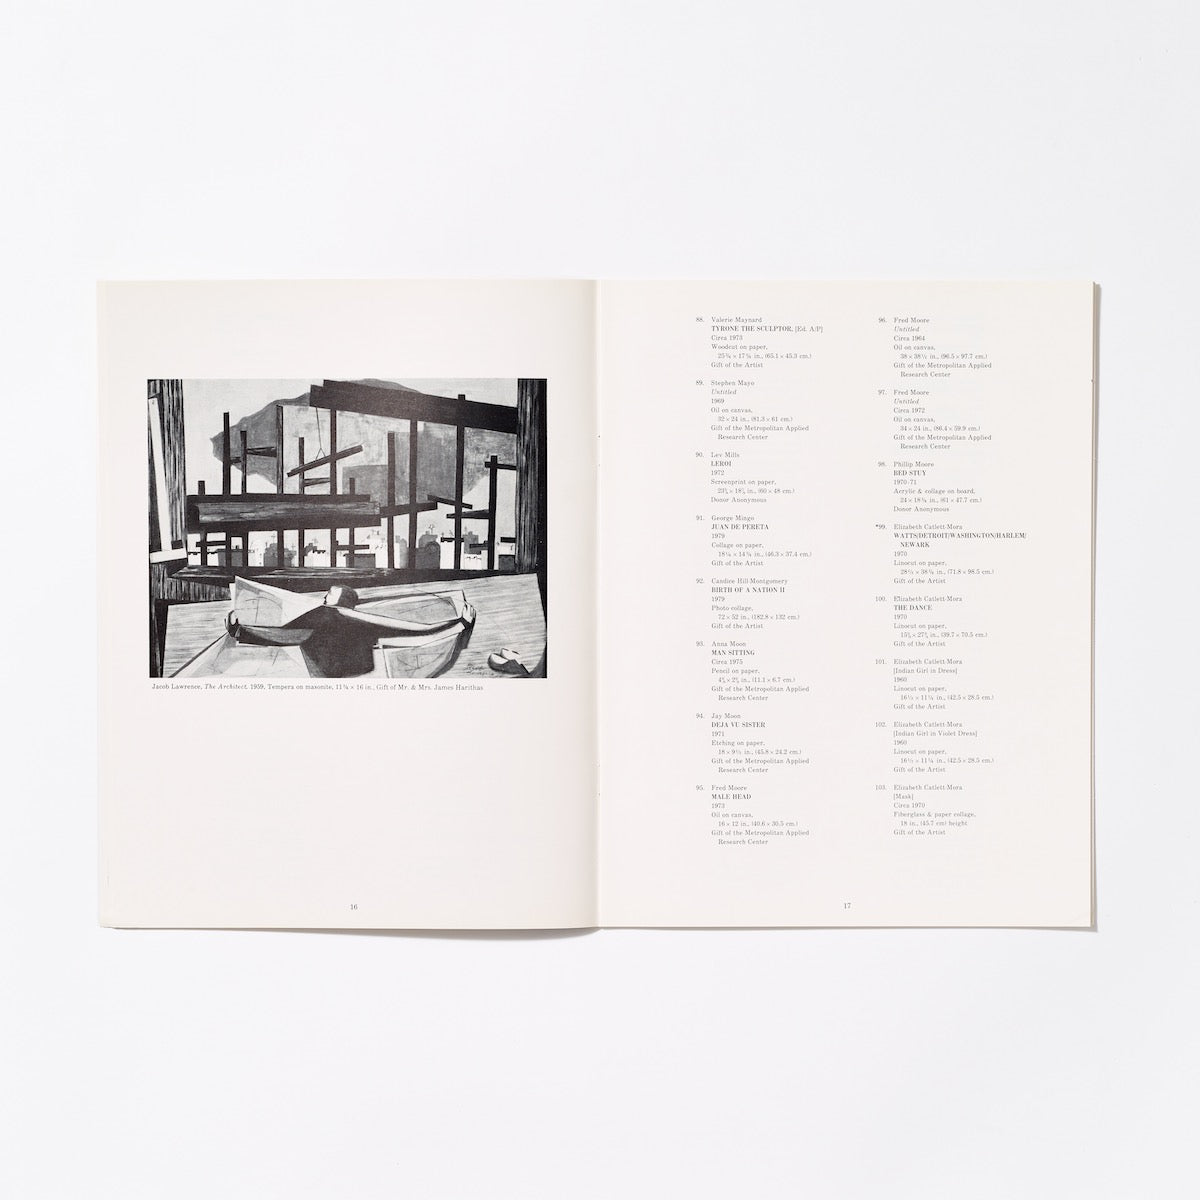 The Permanent Collection of The Studio Museum in Harlem Volume 1